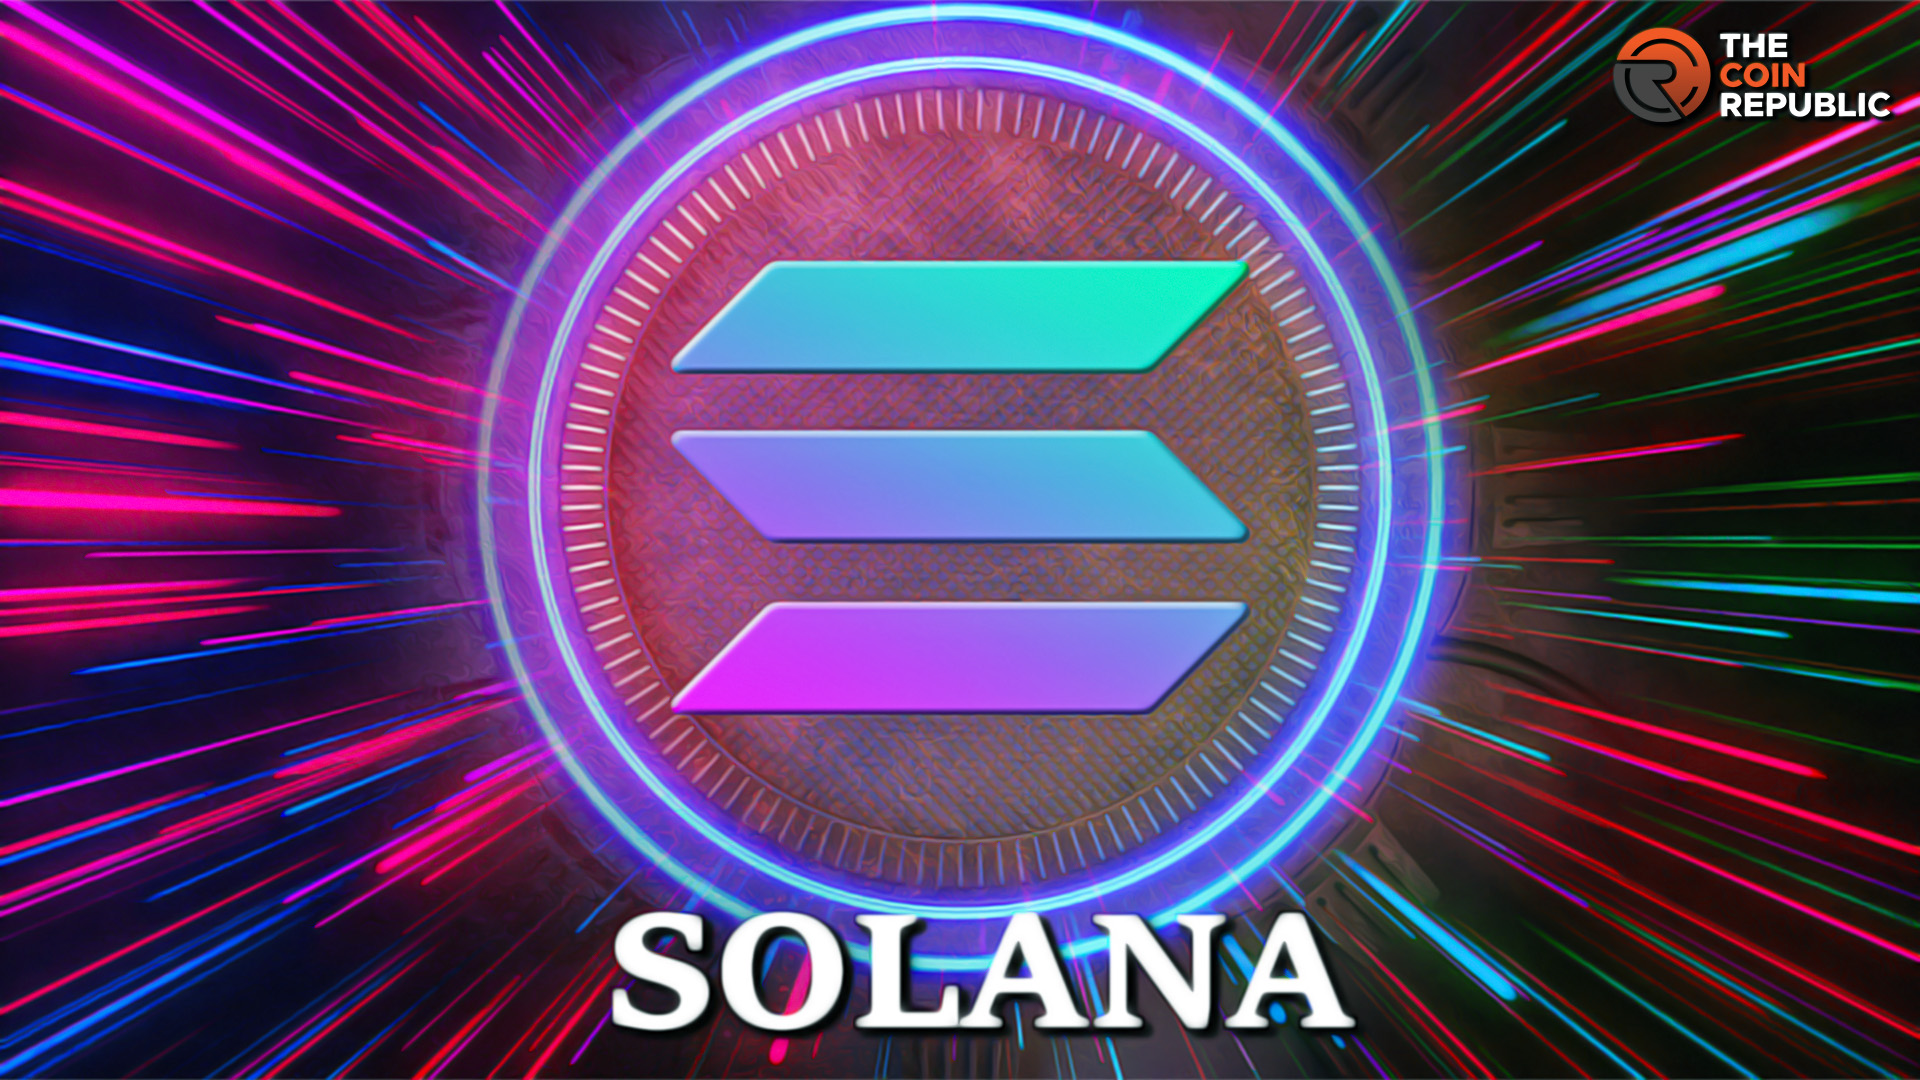 Solana Co-founder Reveals Initial Network Outage Was Intentional